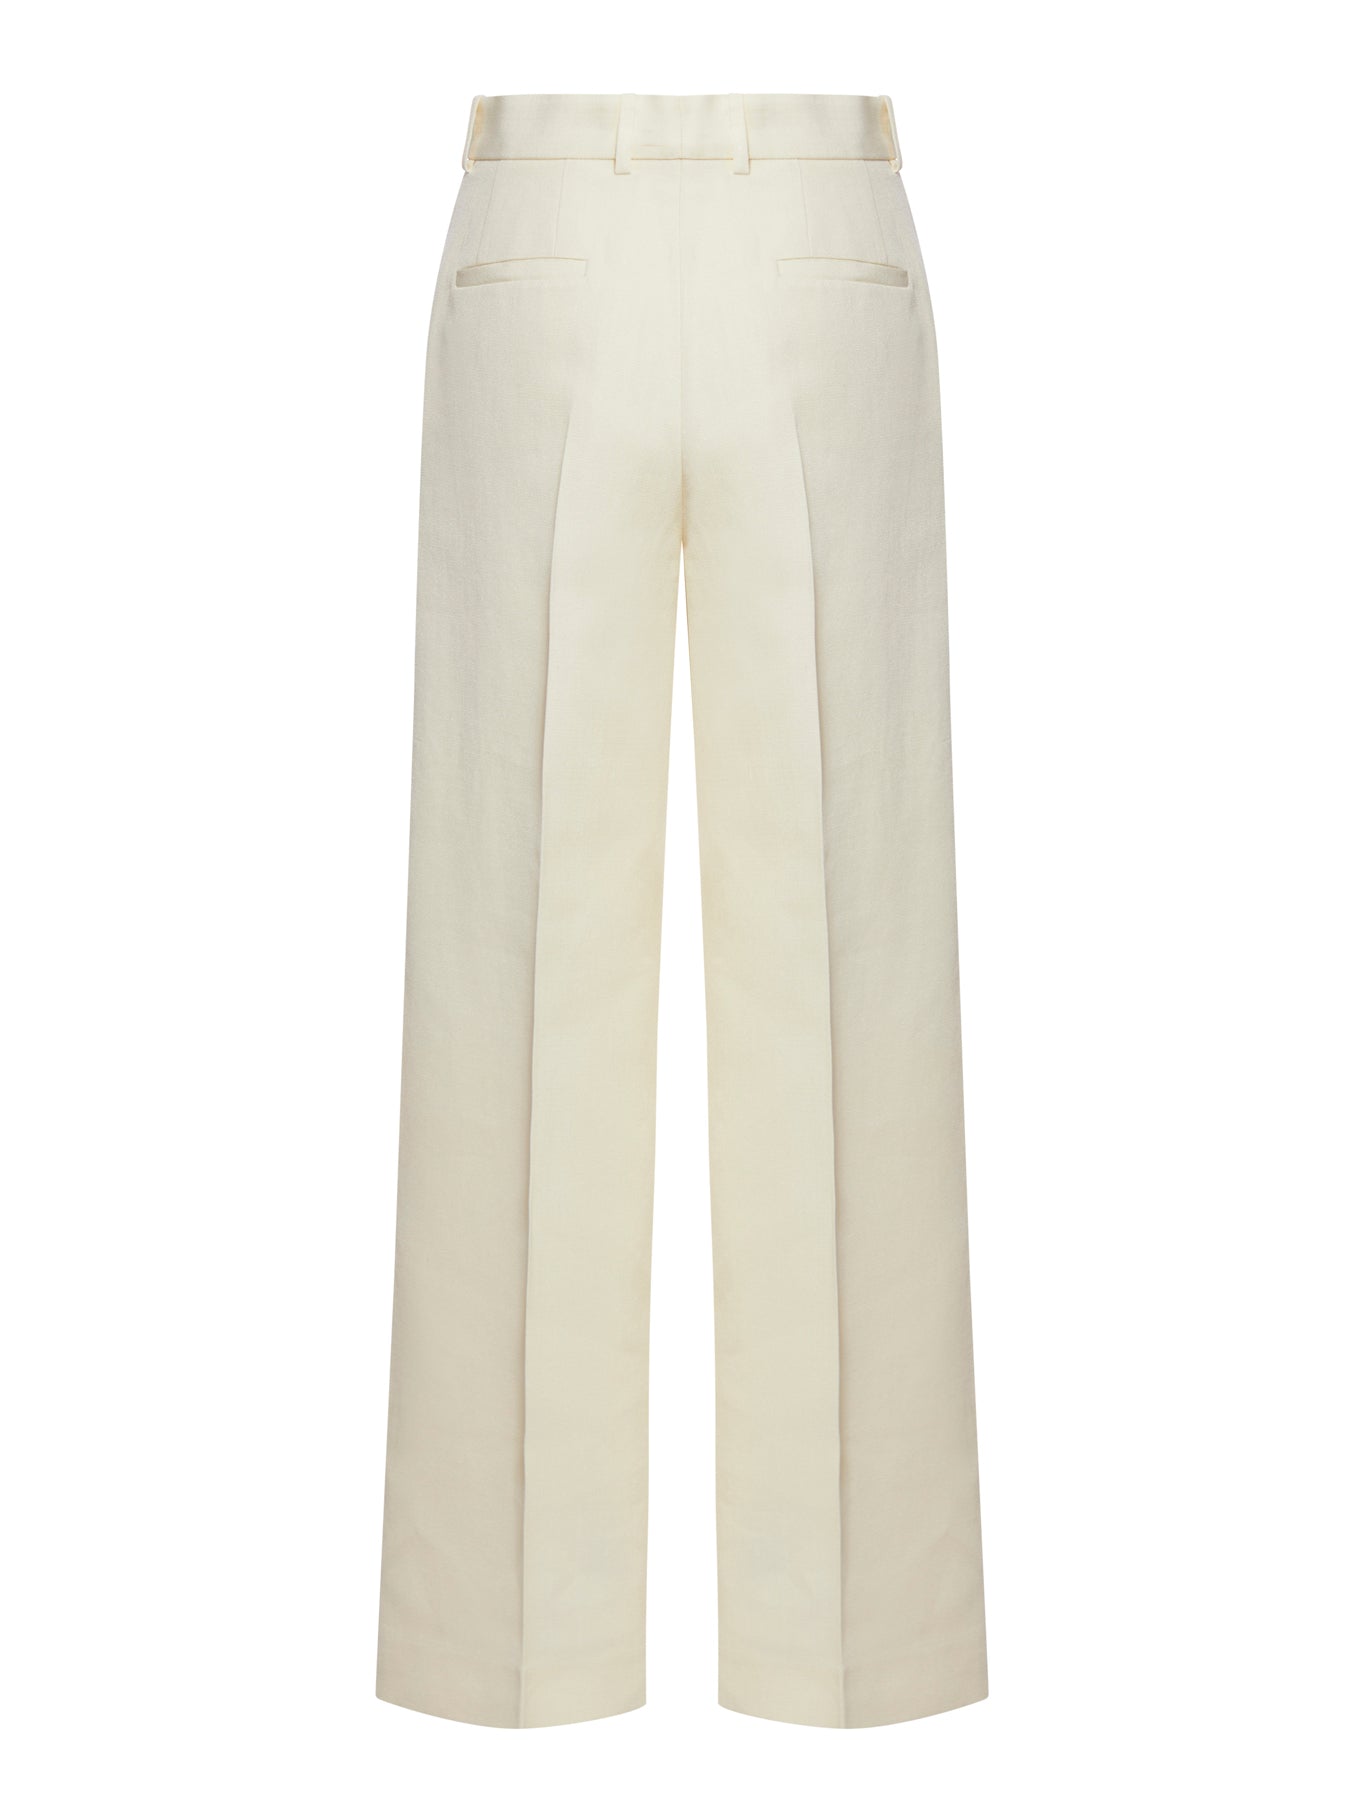 WIDE LEG TAILORED PANT